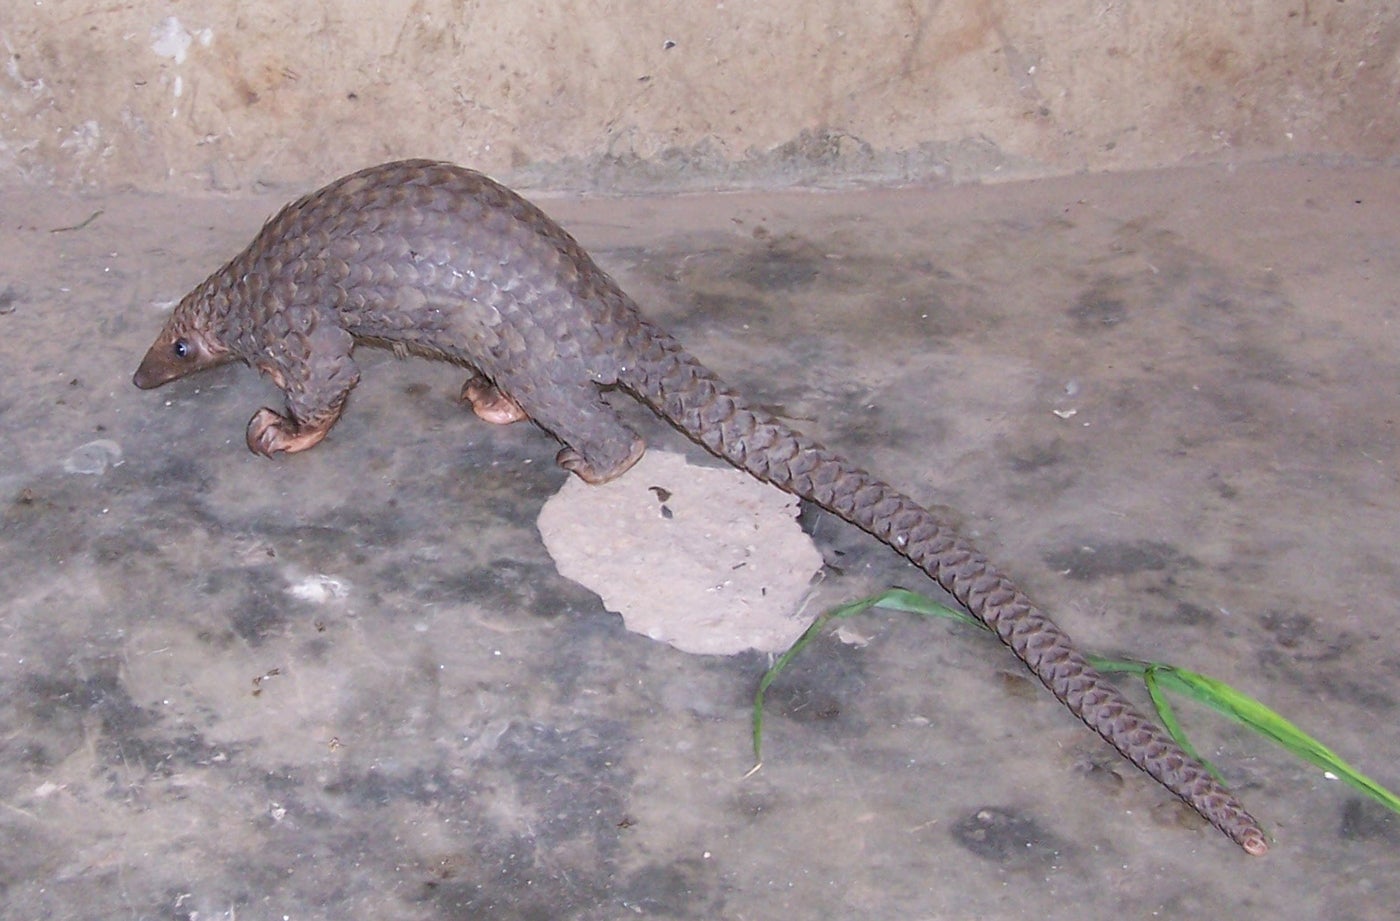 An illegally trafficked common African pangolin